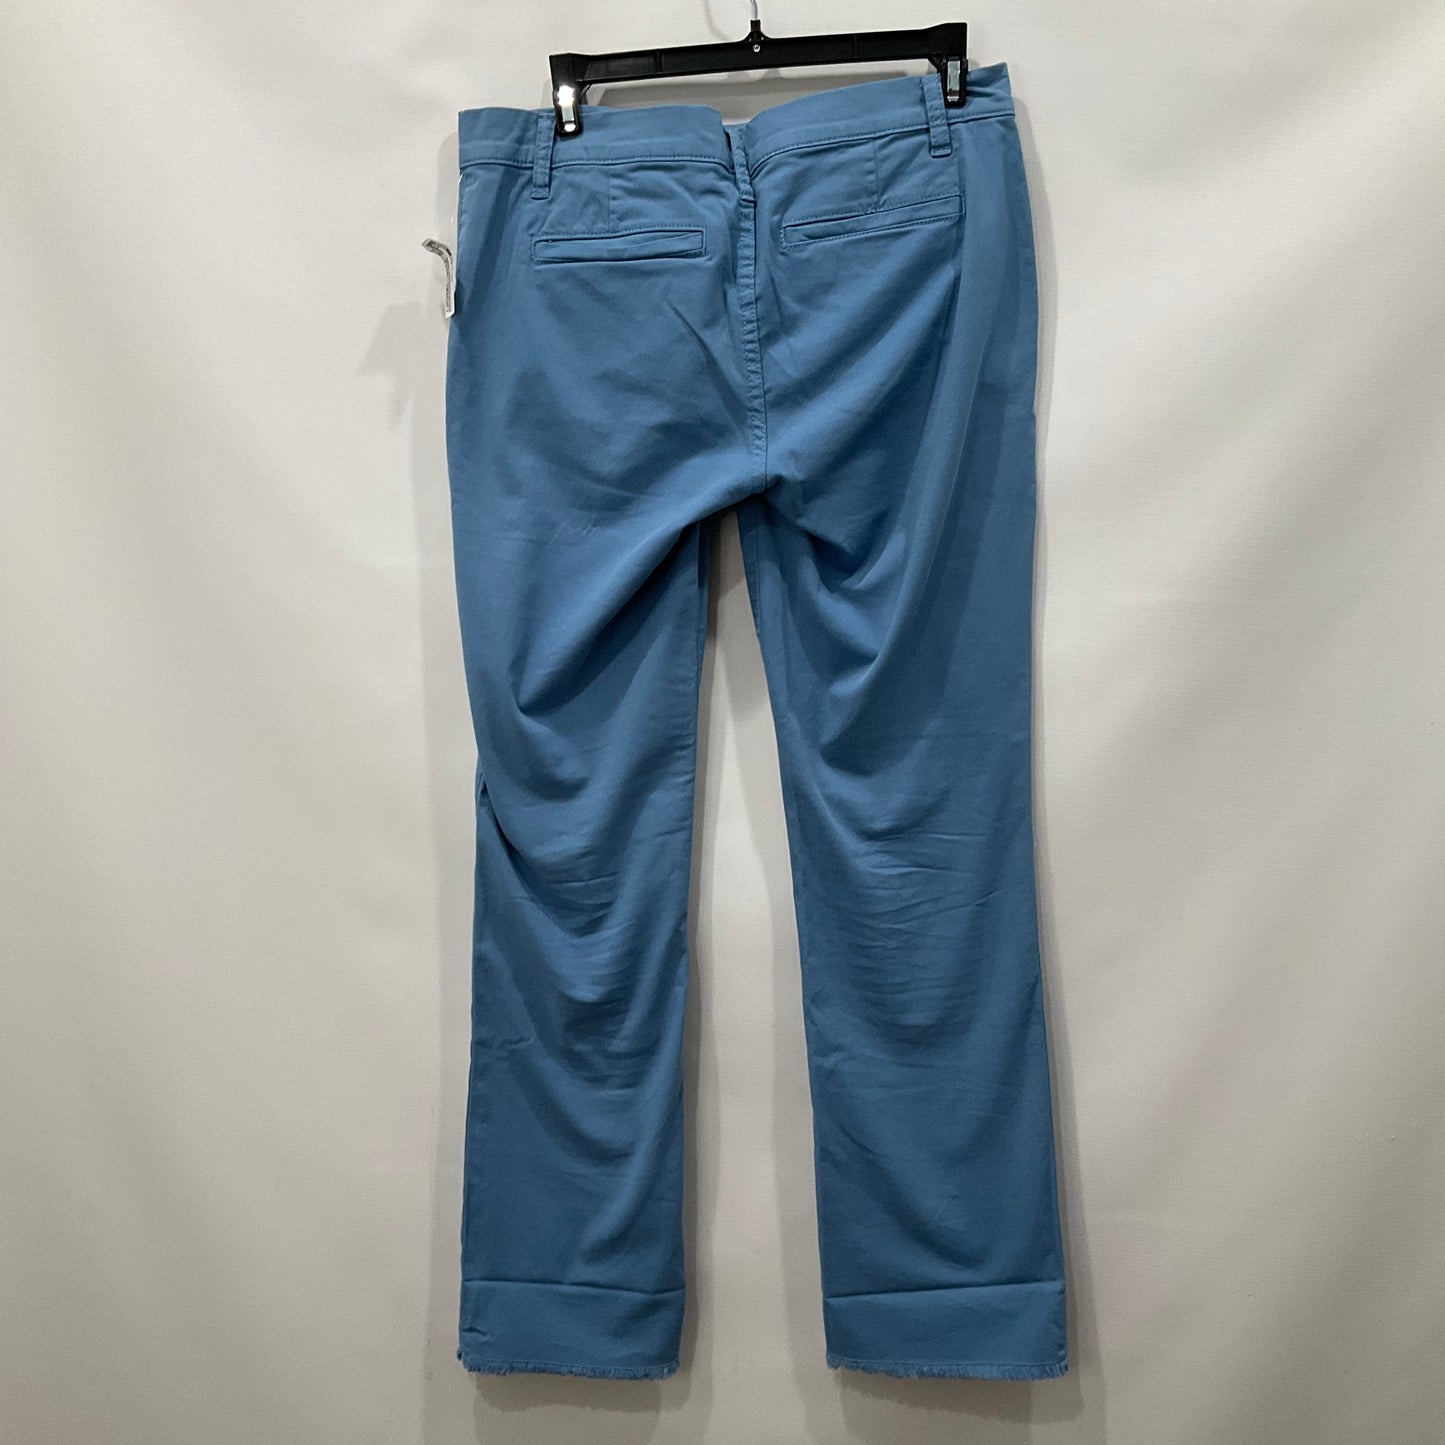 Pants Ankle By Tory Burch  Size: 4